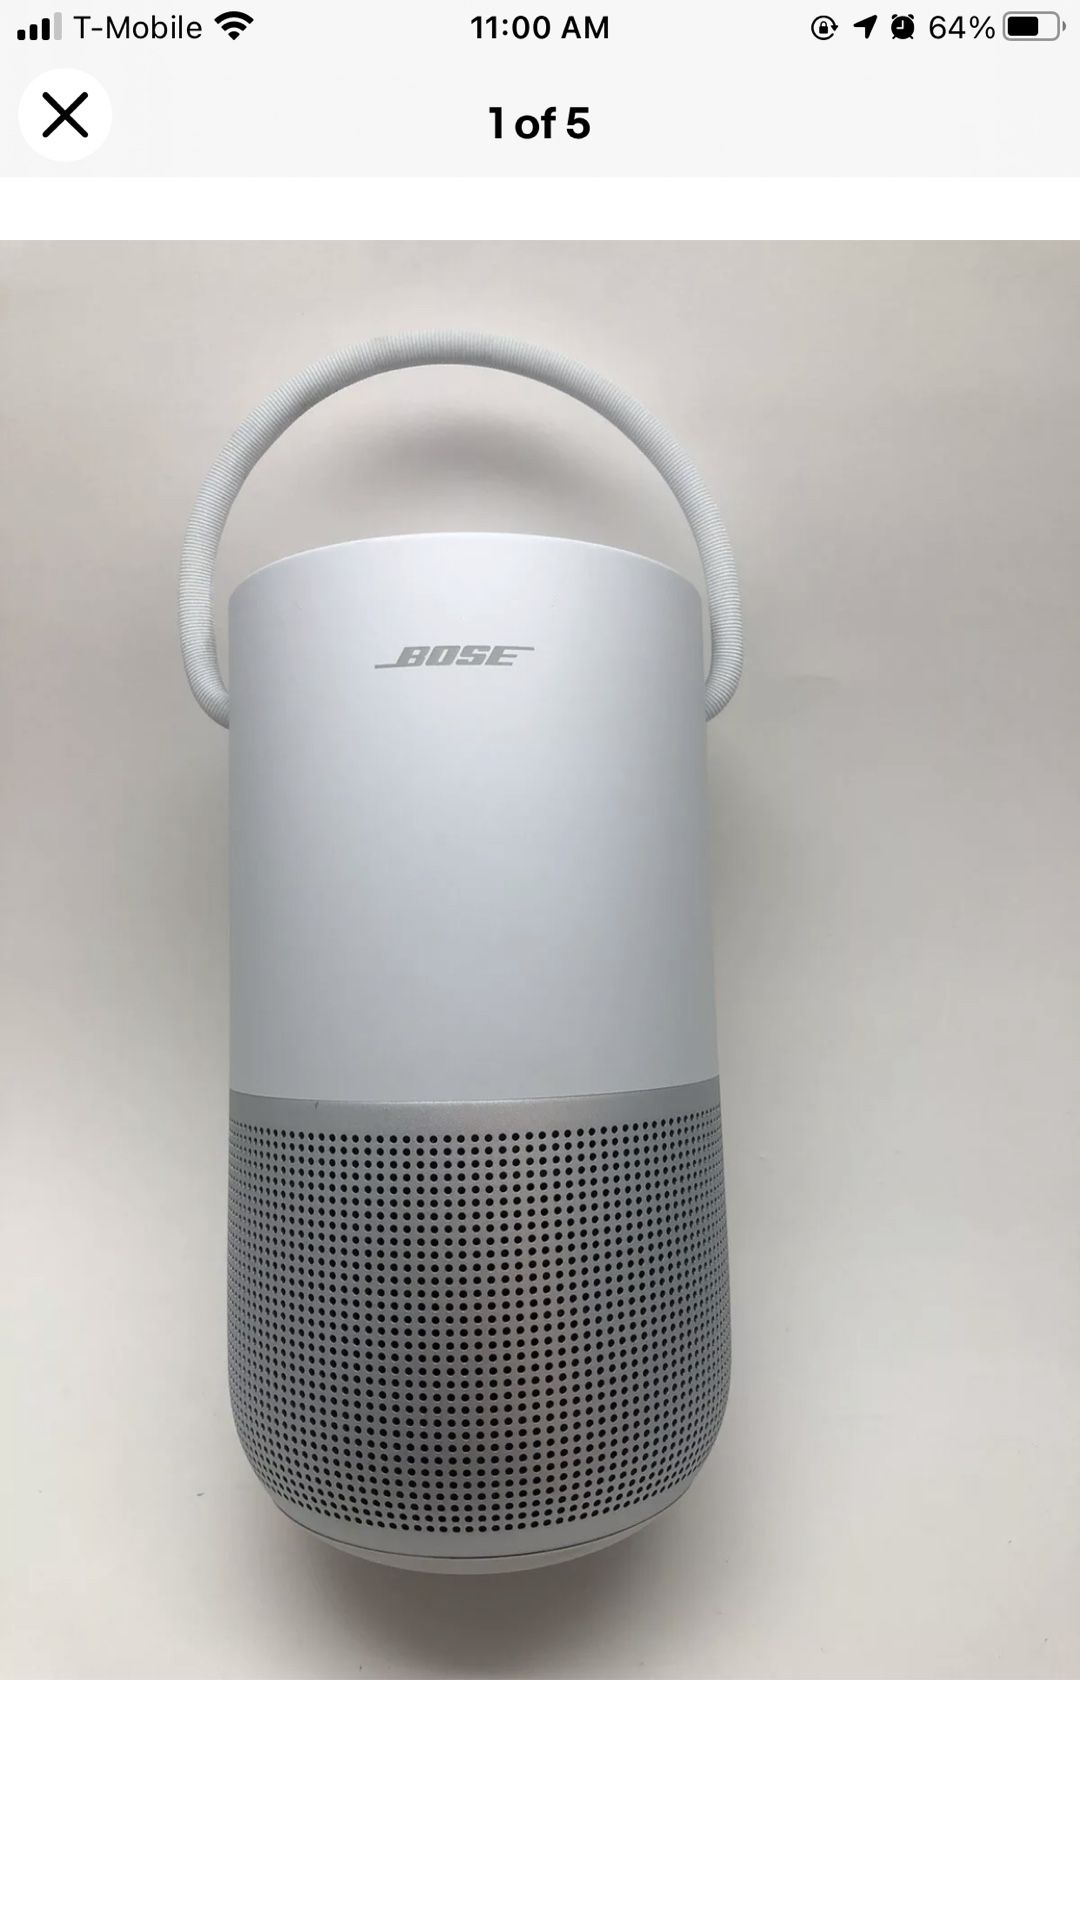 Bose Portable Home Bluetooth WiFi Smart Speaker Voice Controlled